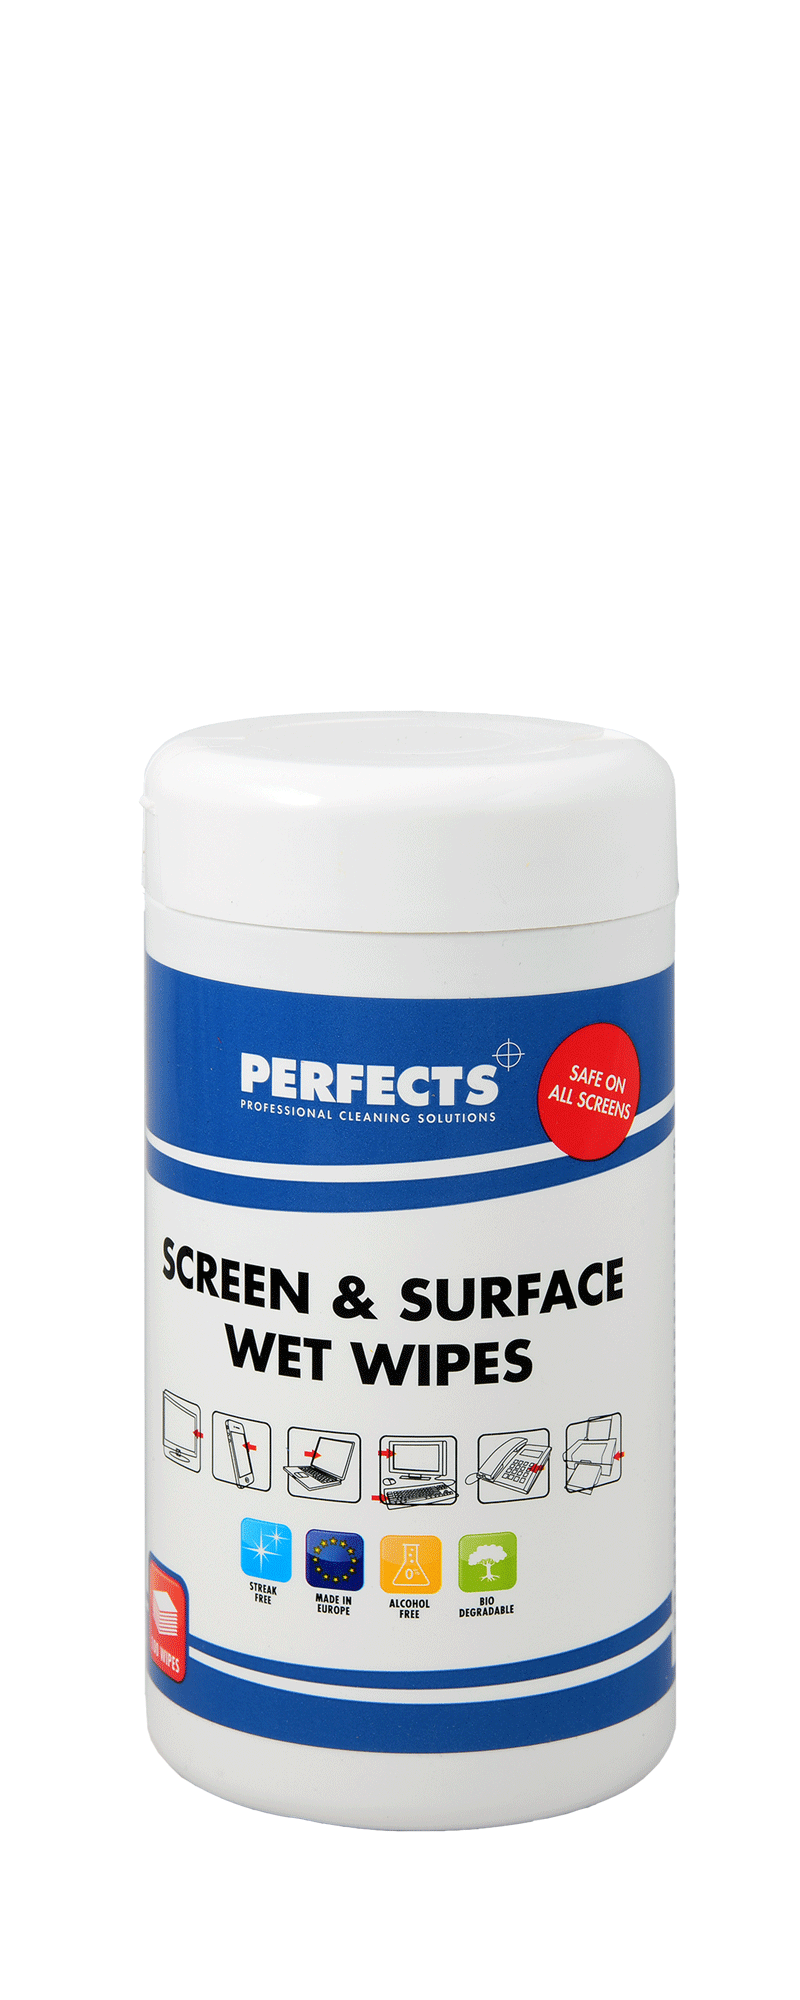 Screen & Surface Wet Wipes